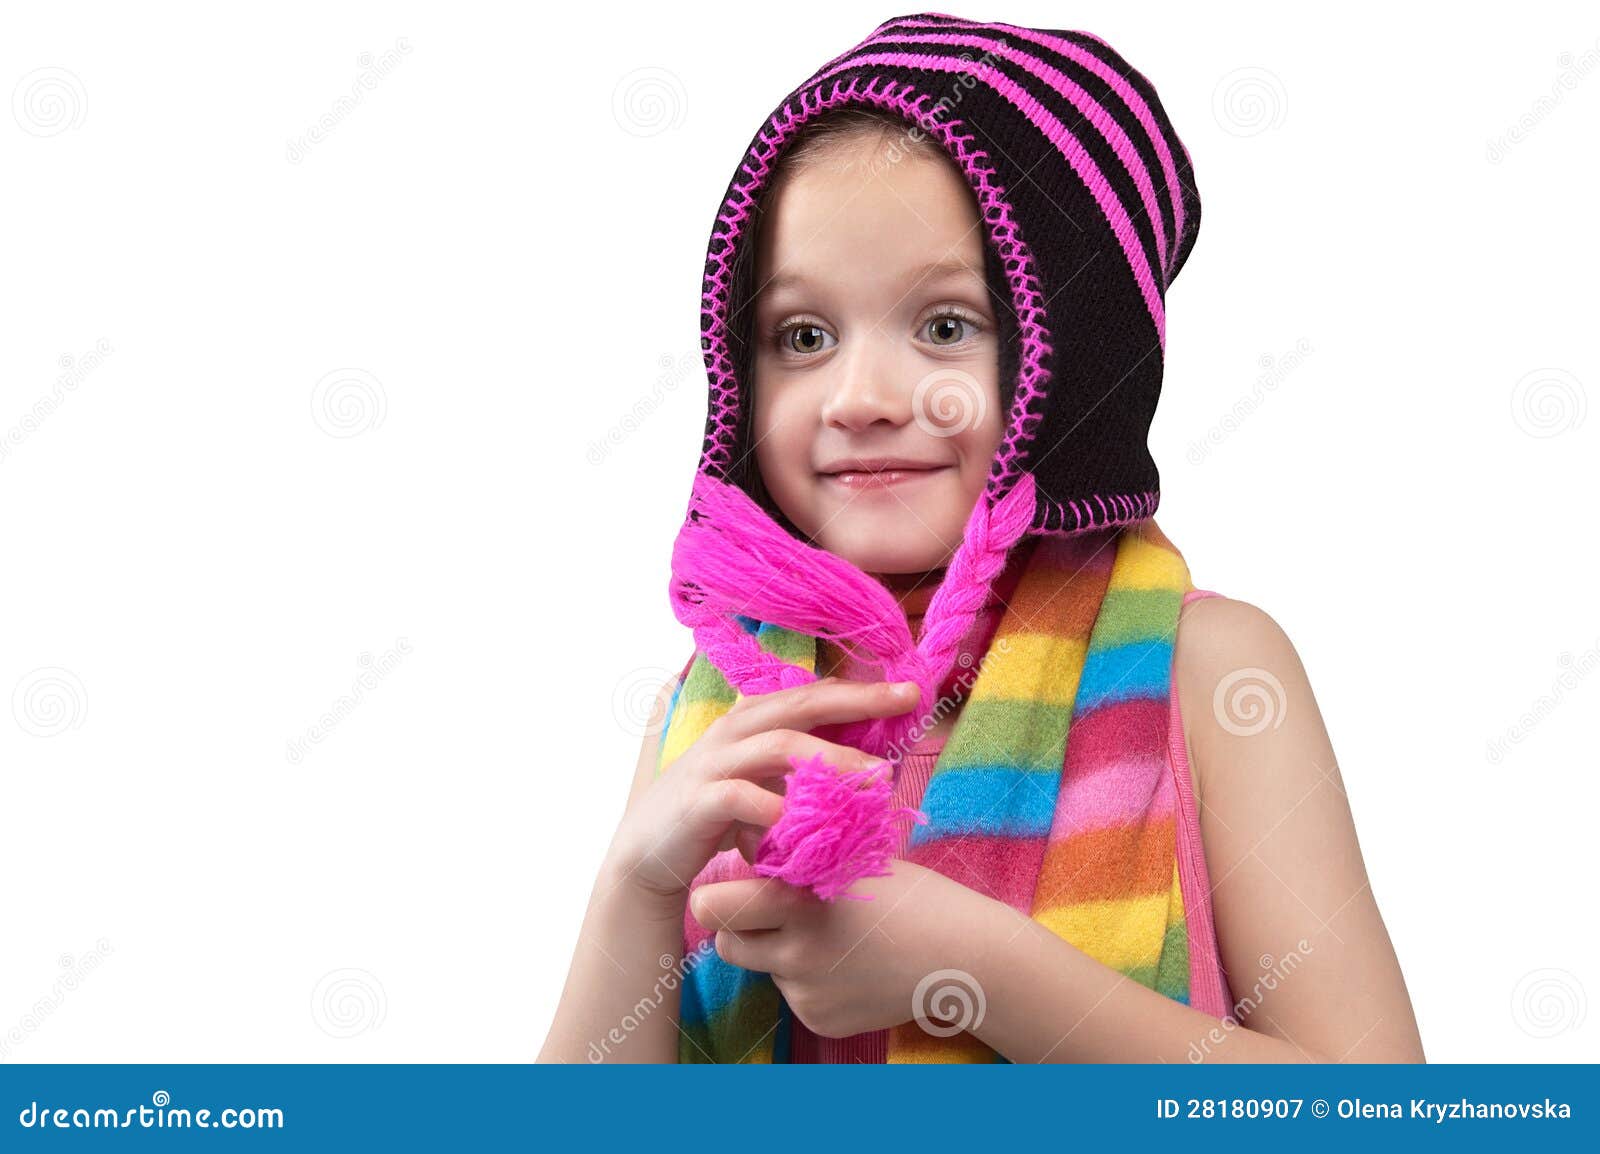 Smiling Six Year Old Girl In A Colorful Scarf Royalty Free